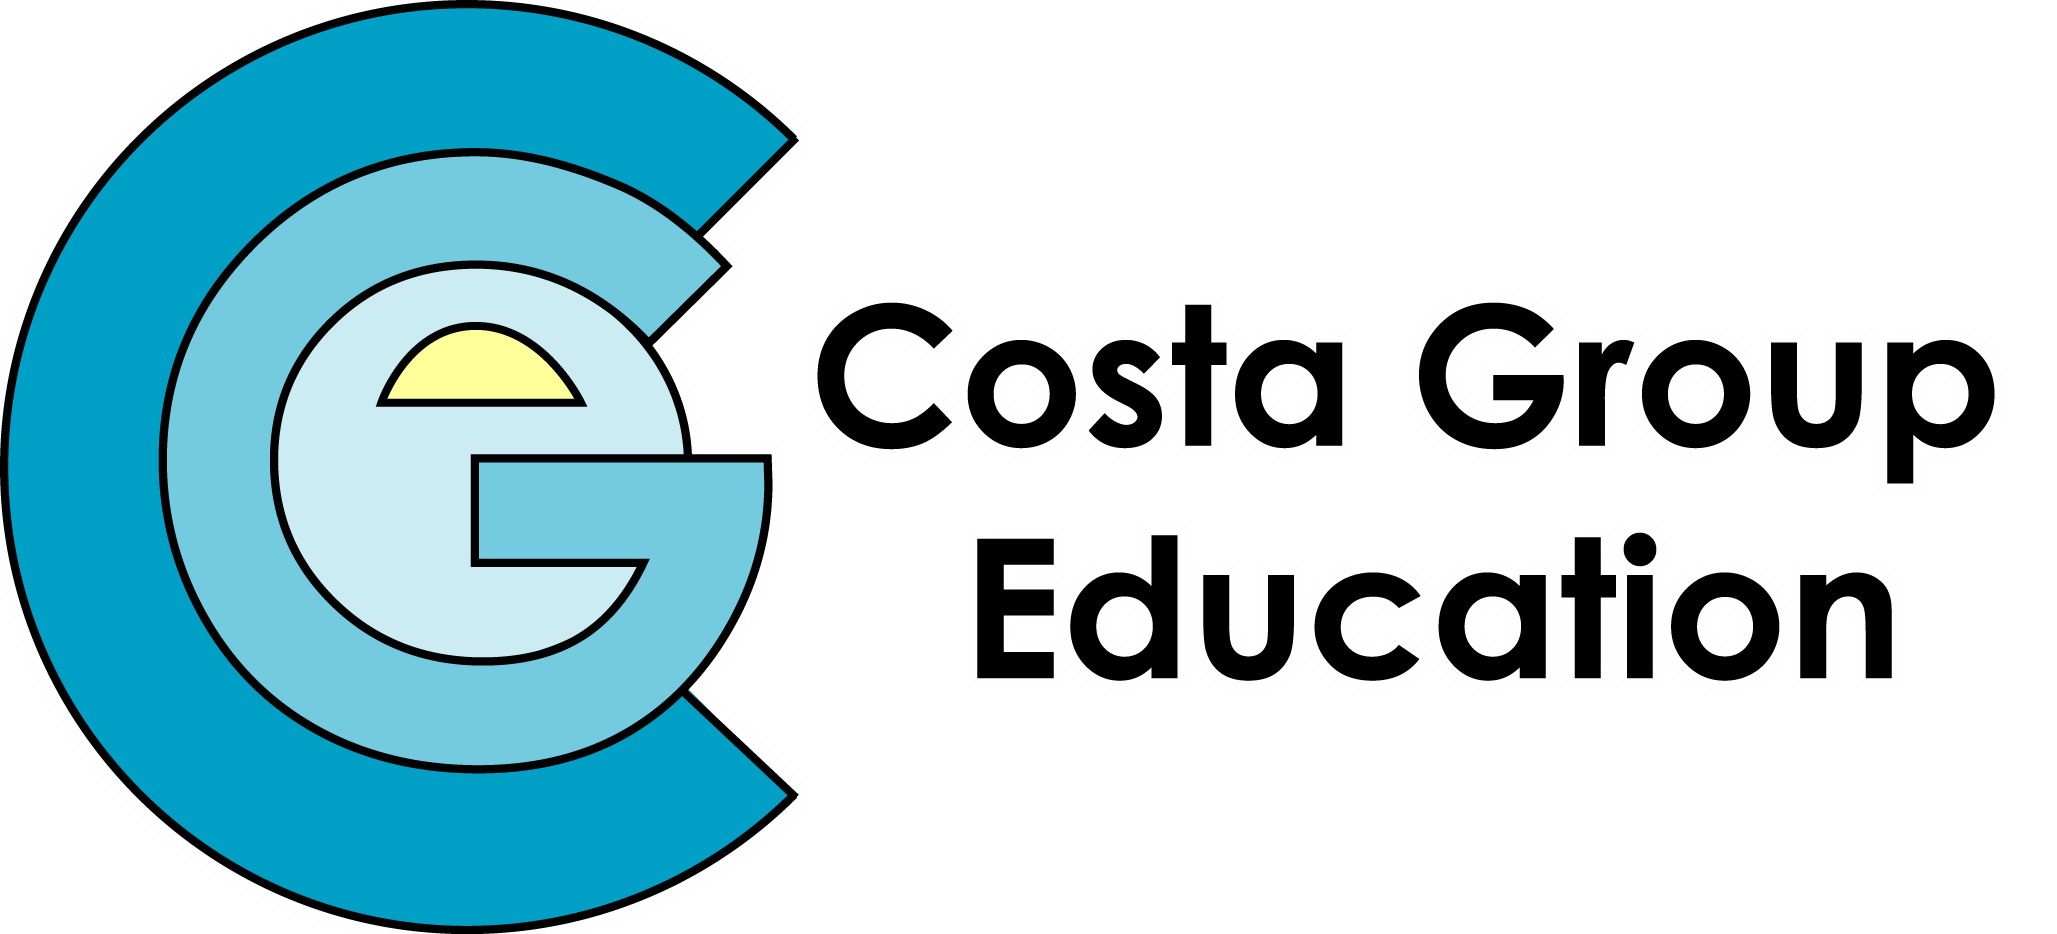 Costa Group Education